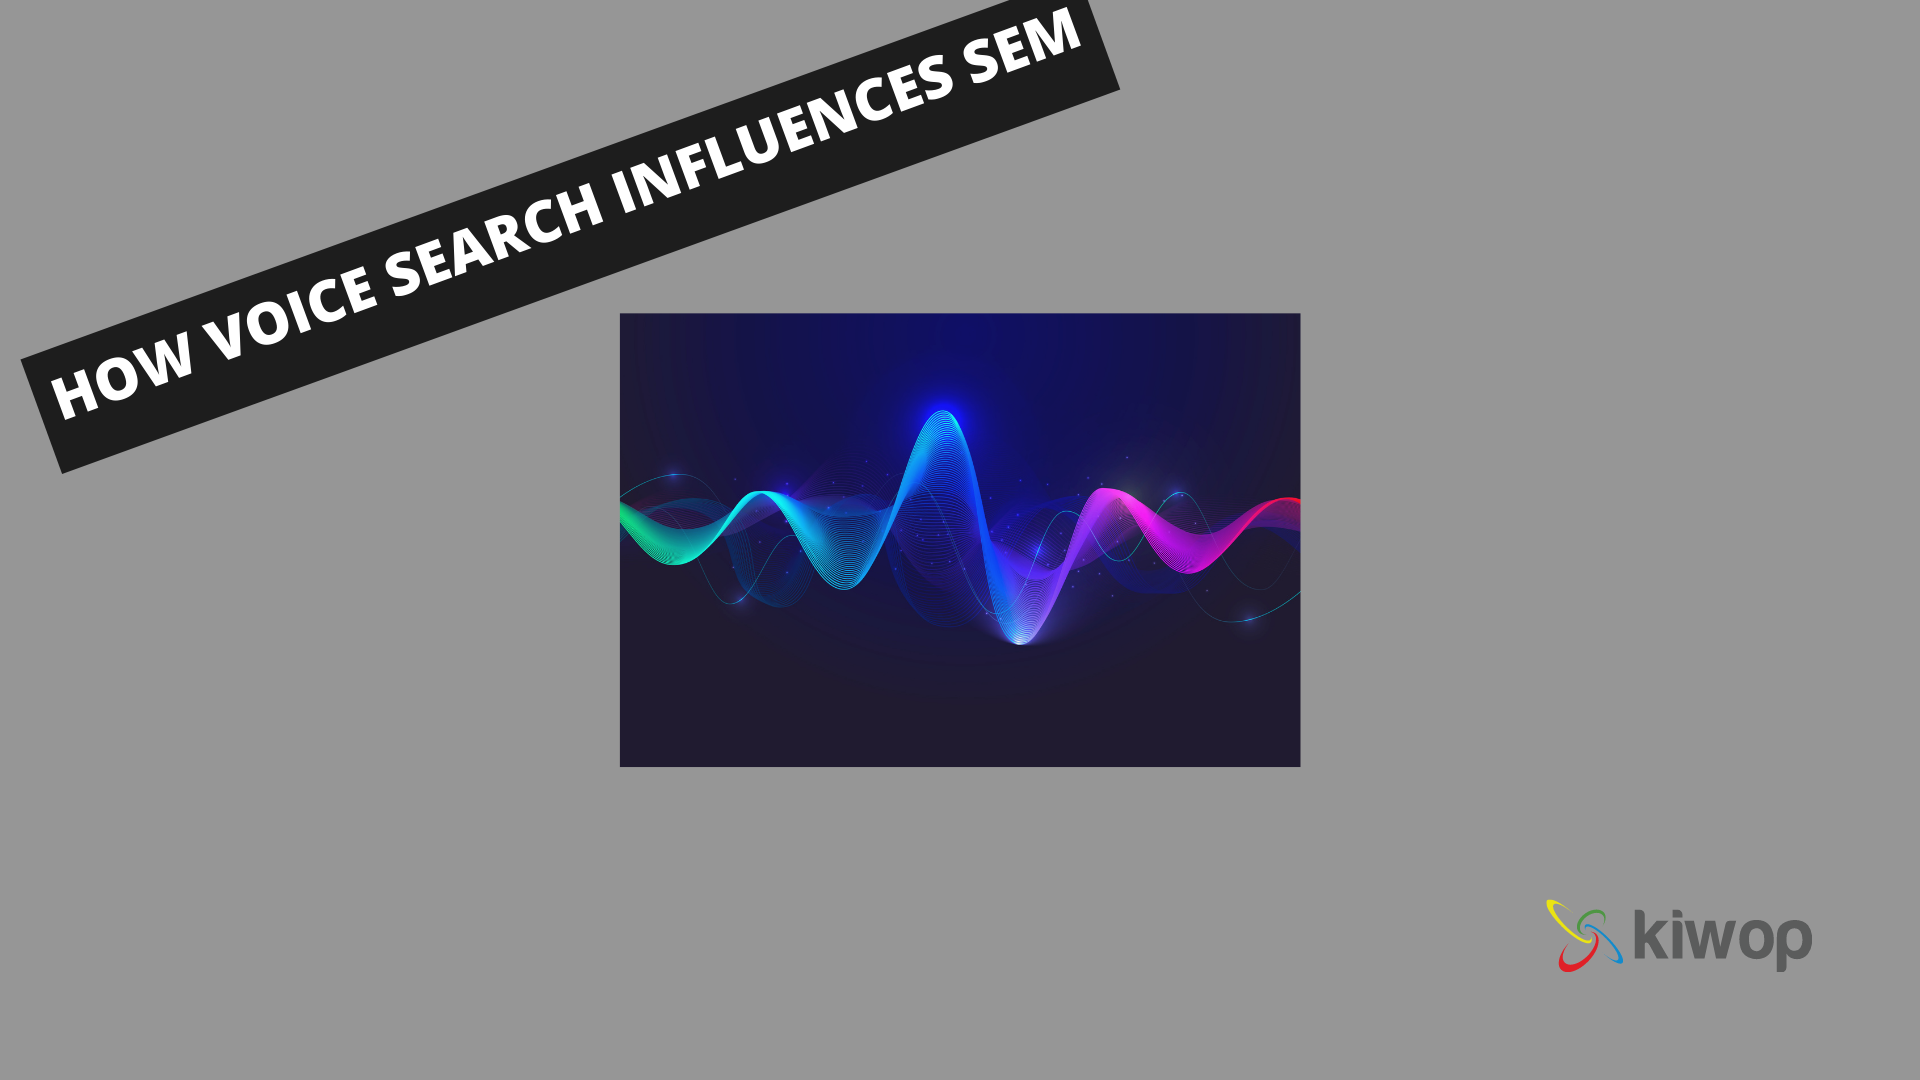 Voice searches: how they influence SEM